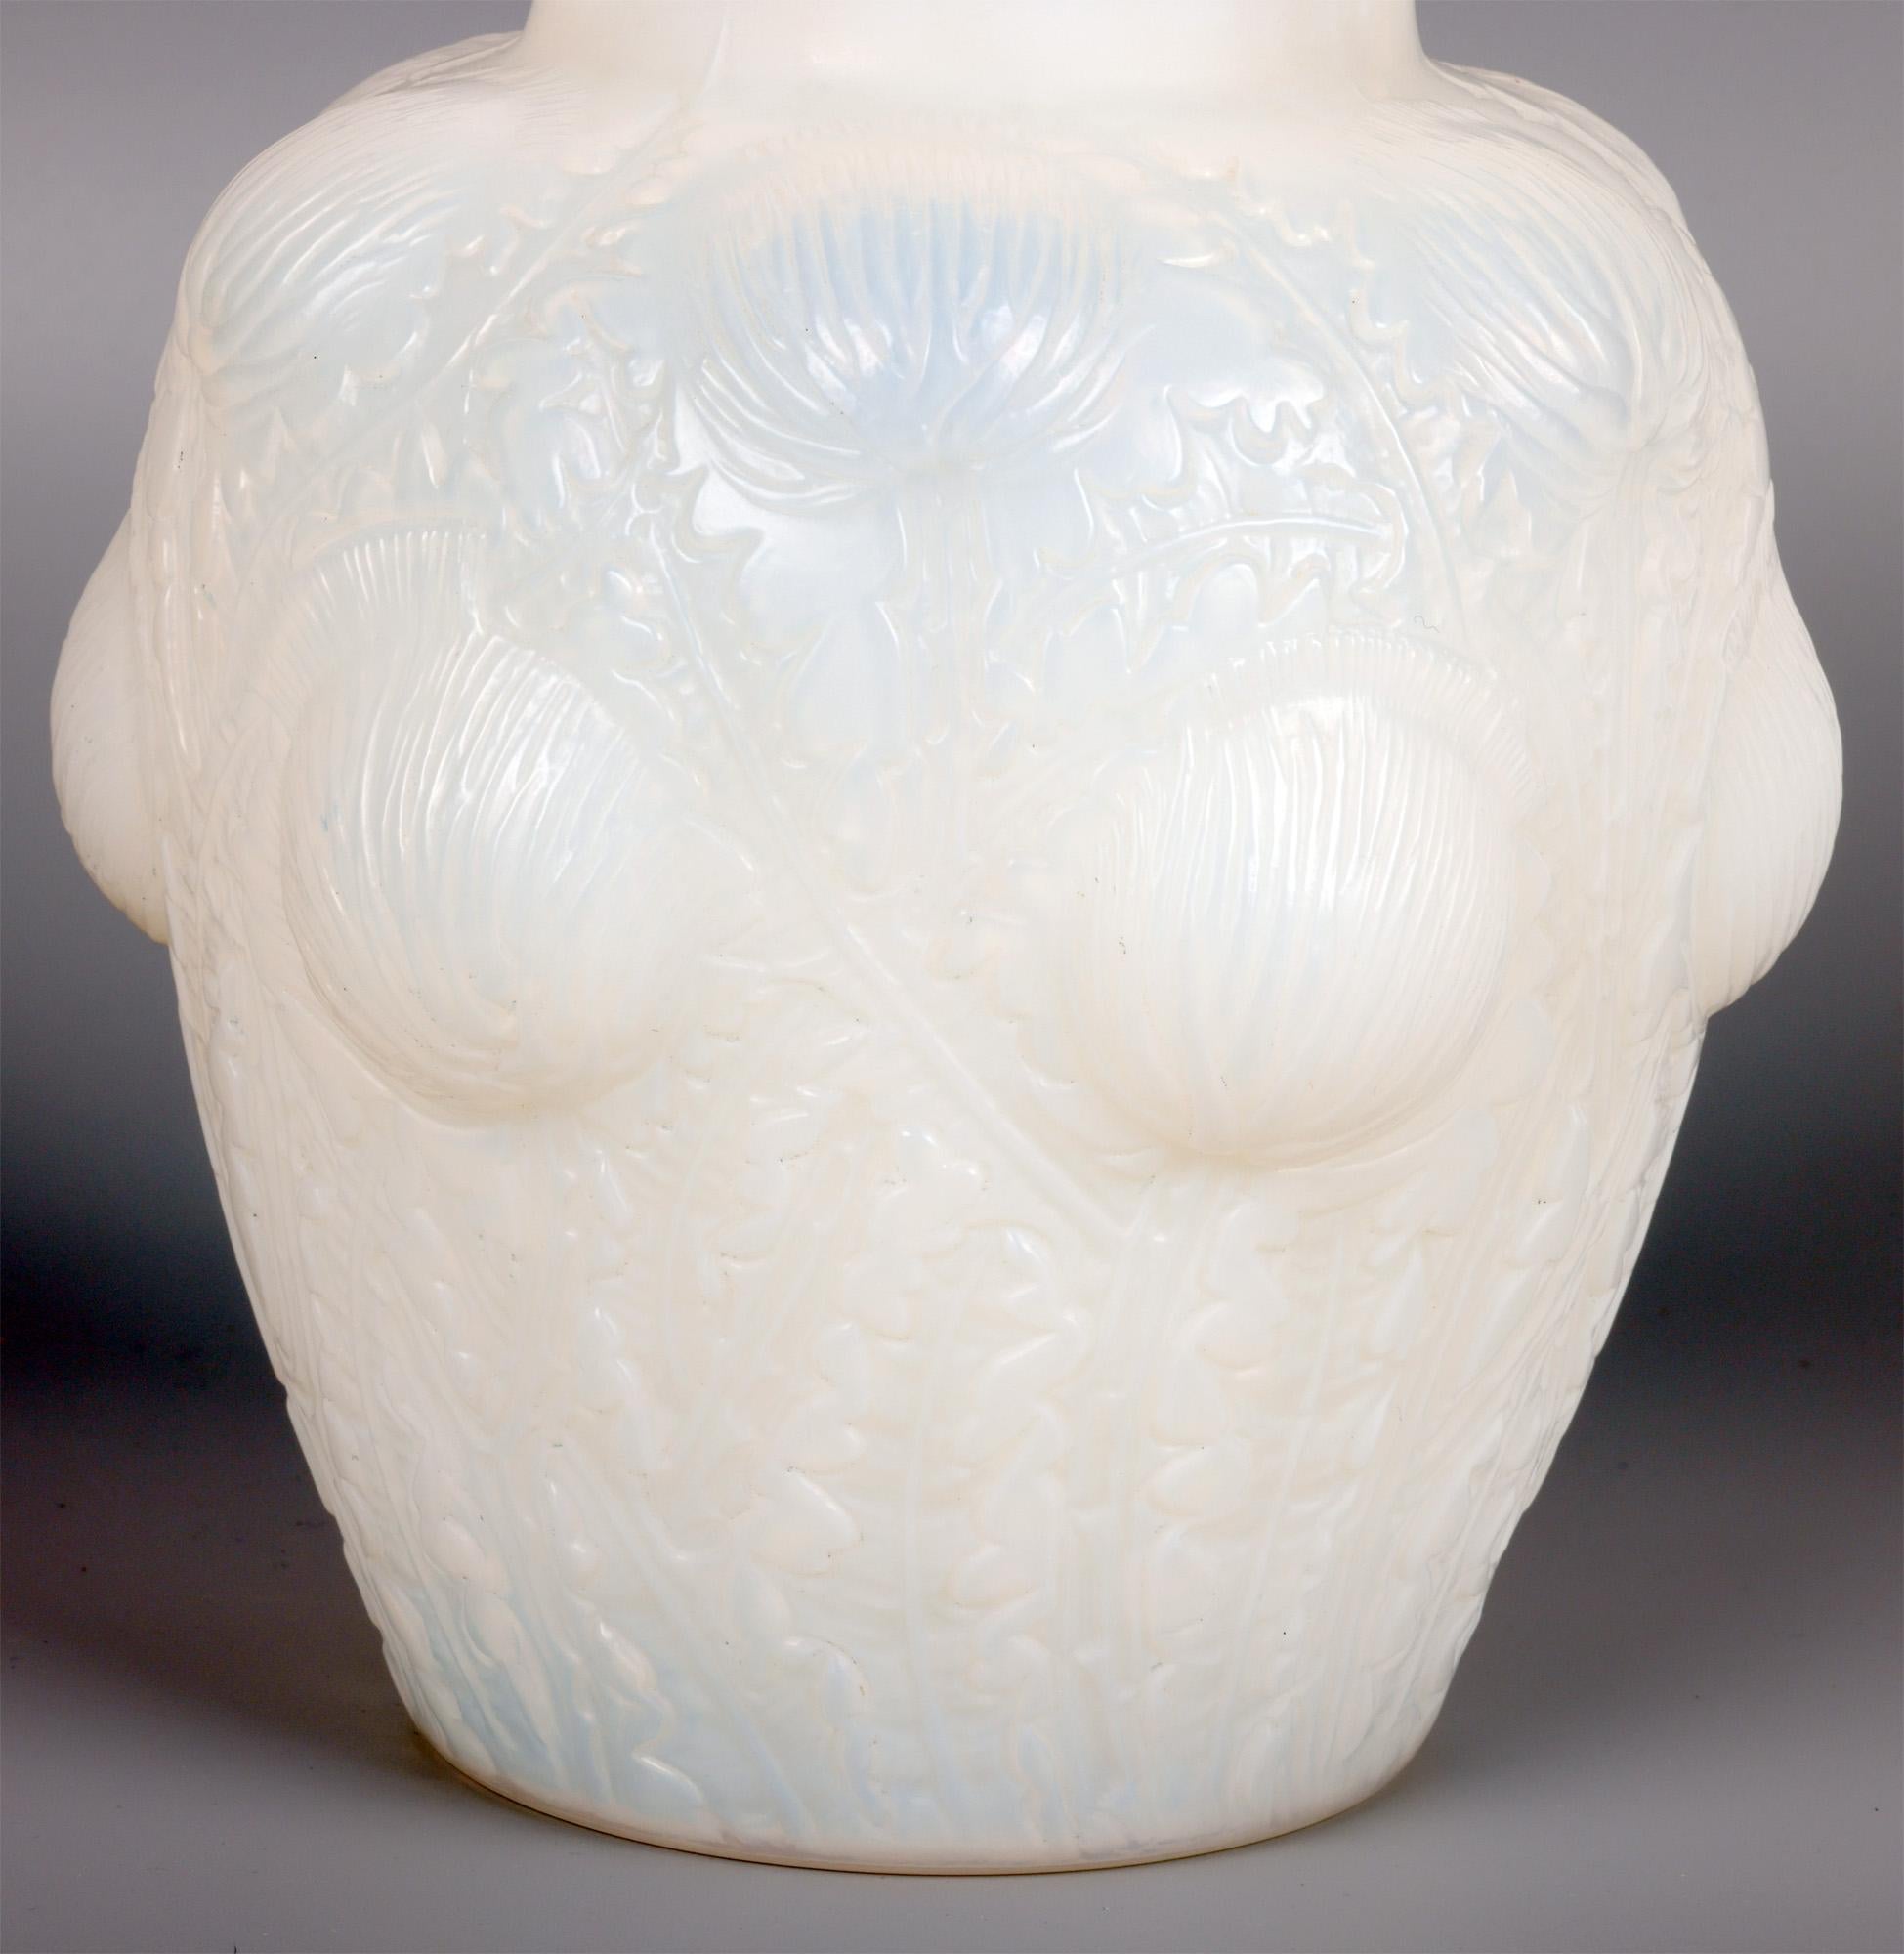 French Rene Lalique Early Opalescent Domrémy Art Glass Vase For Sale